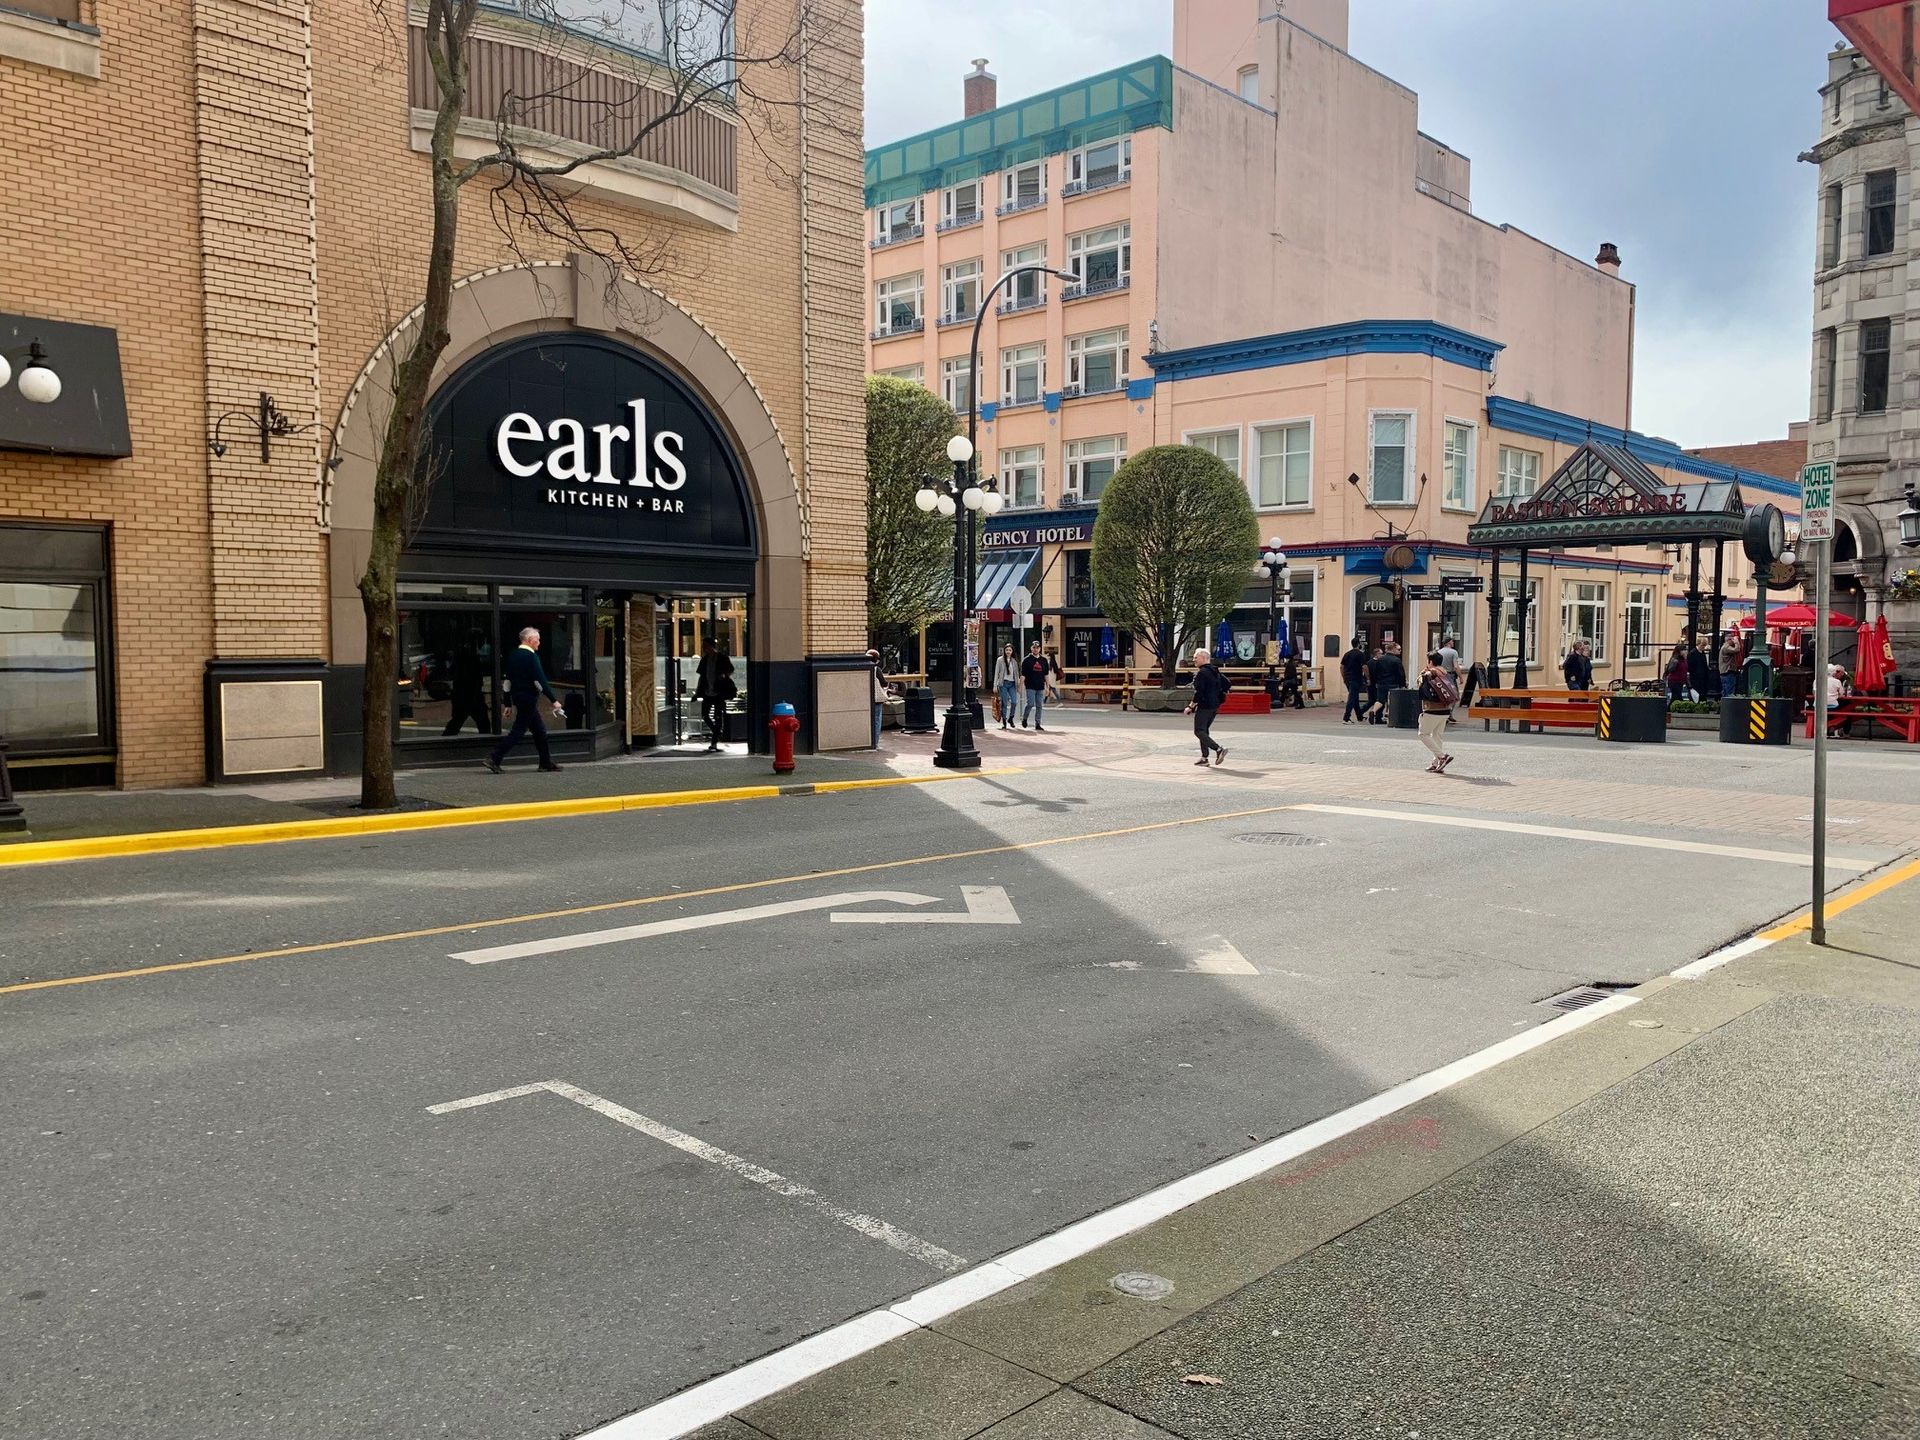 A store called earl 's is on the corner of a city street